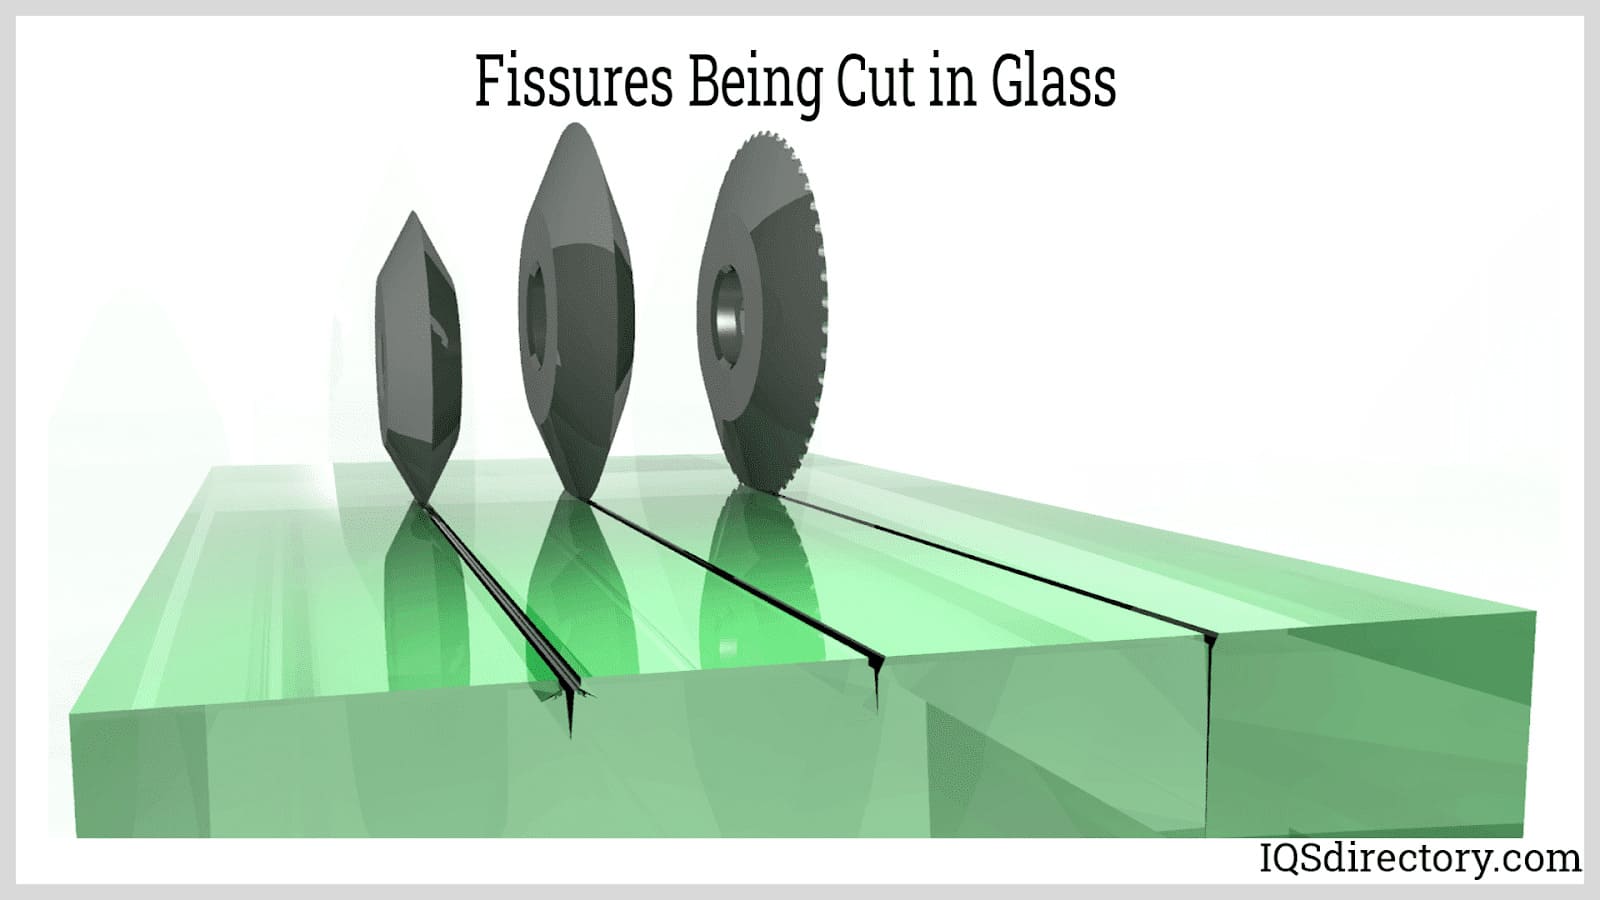 Fissures Being Cut in Glass